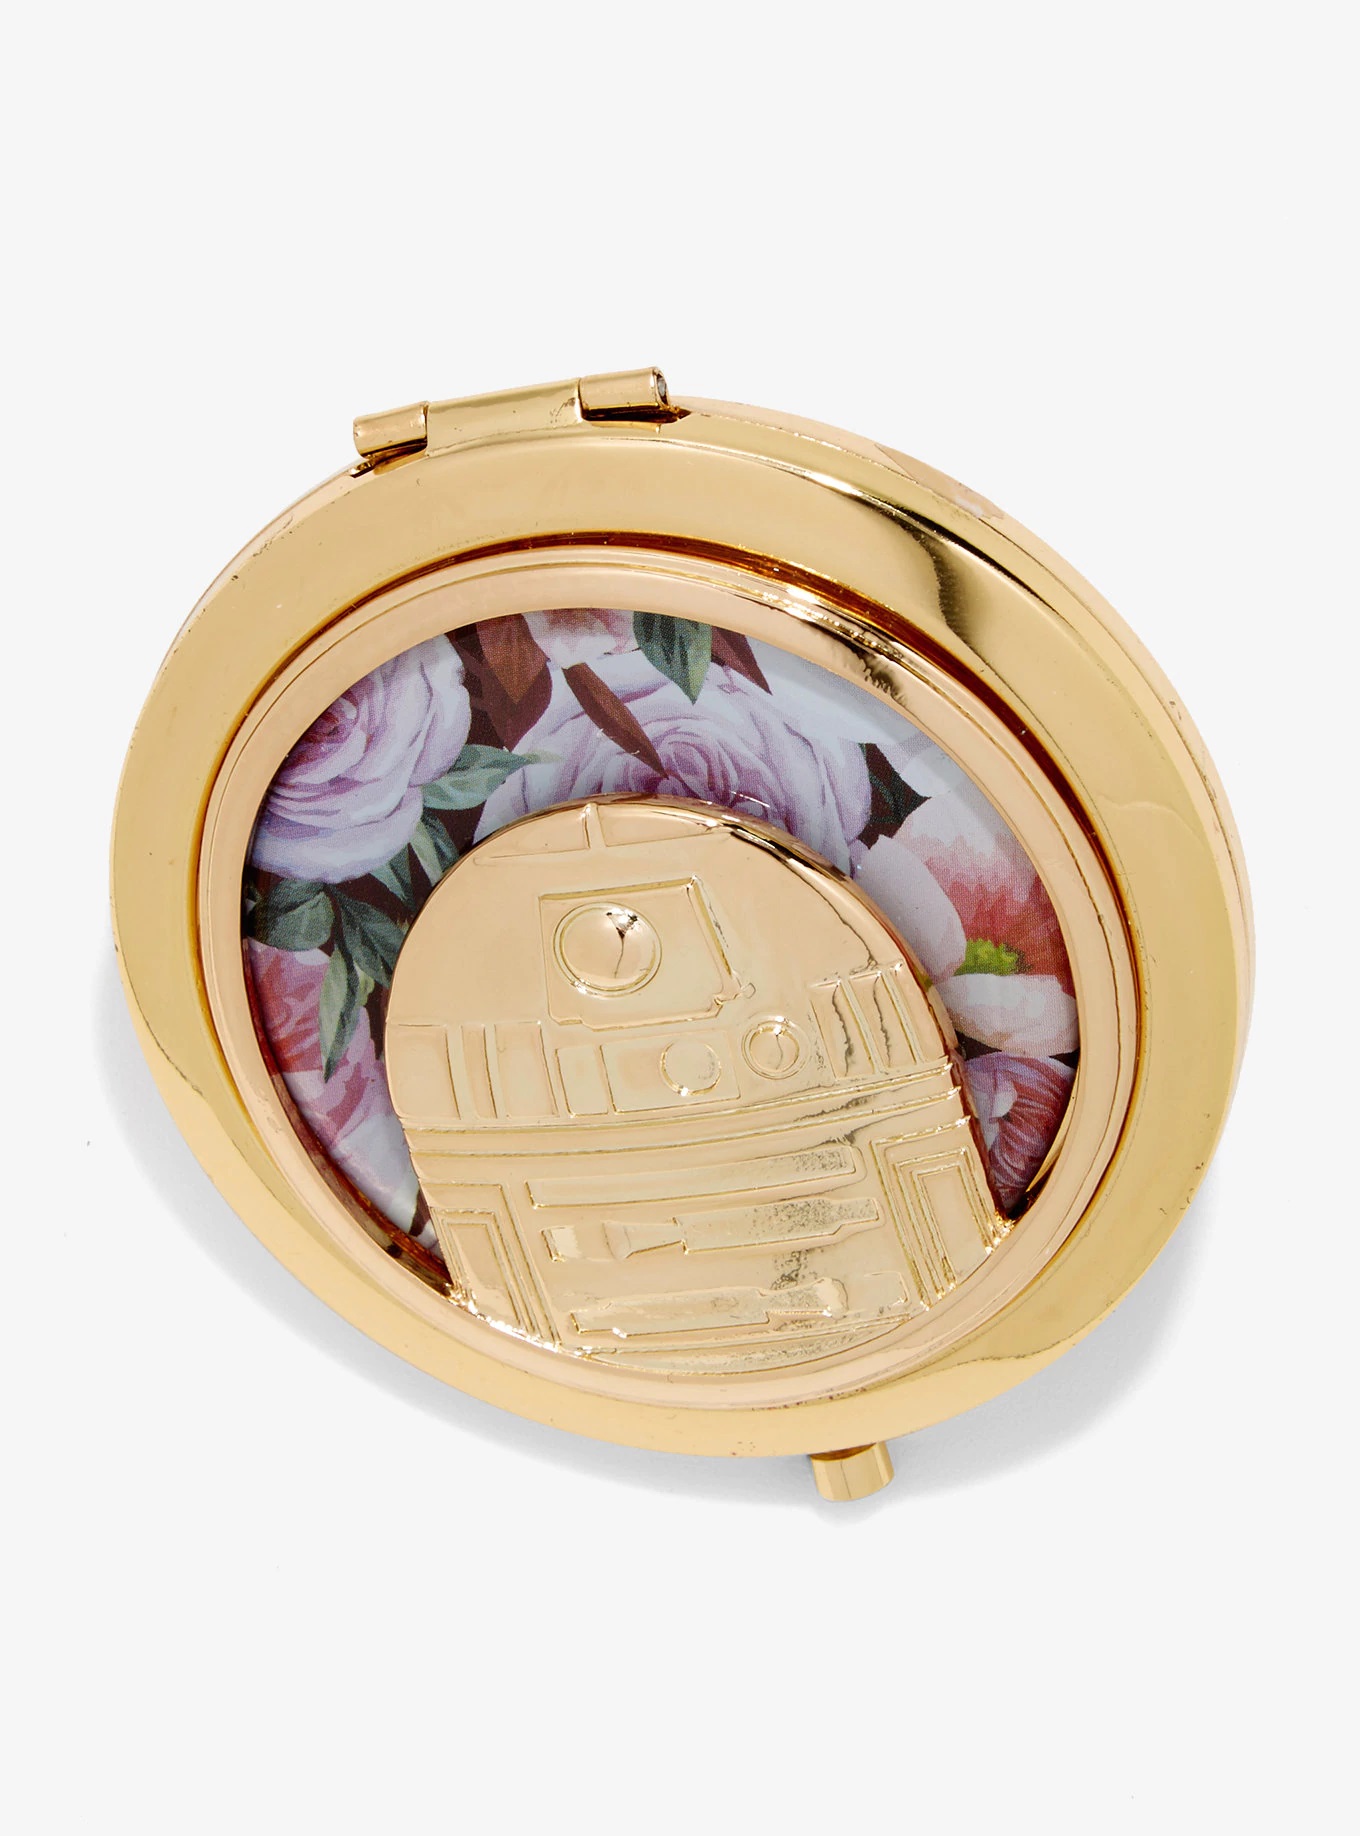 Loungefly x Star Wars R2-D2 Floral Compact Mirror at Box Lunch